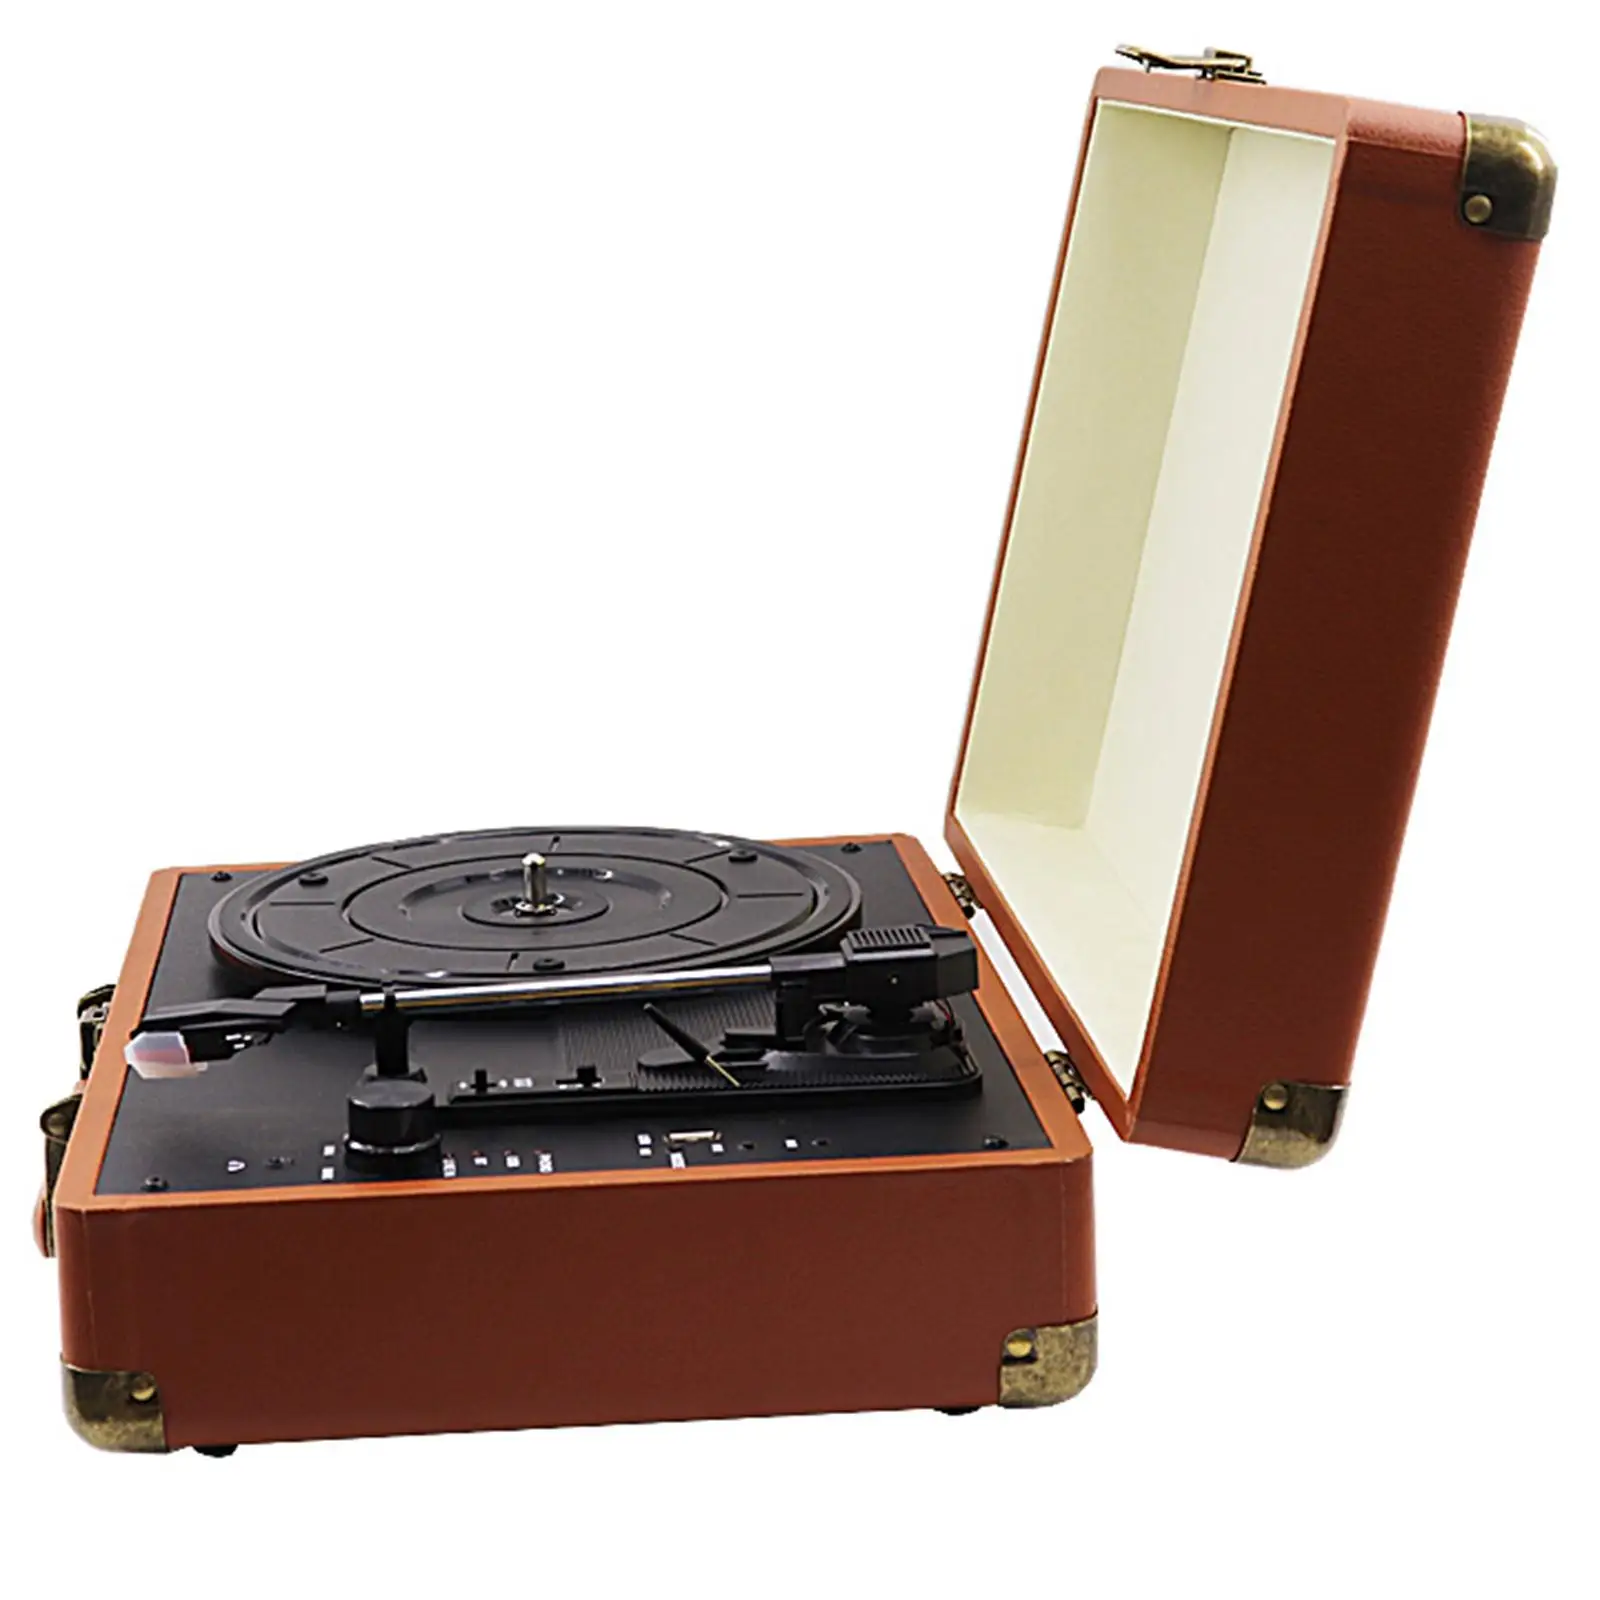 Vinyl Record Player Turntable Gramophone 3 Speeds 2.0 Stereo Speaker Retro Record Player for Bar Decoration Souvenir Collection